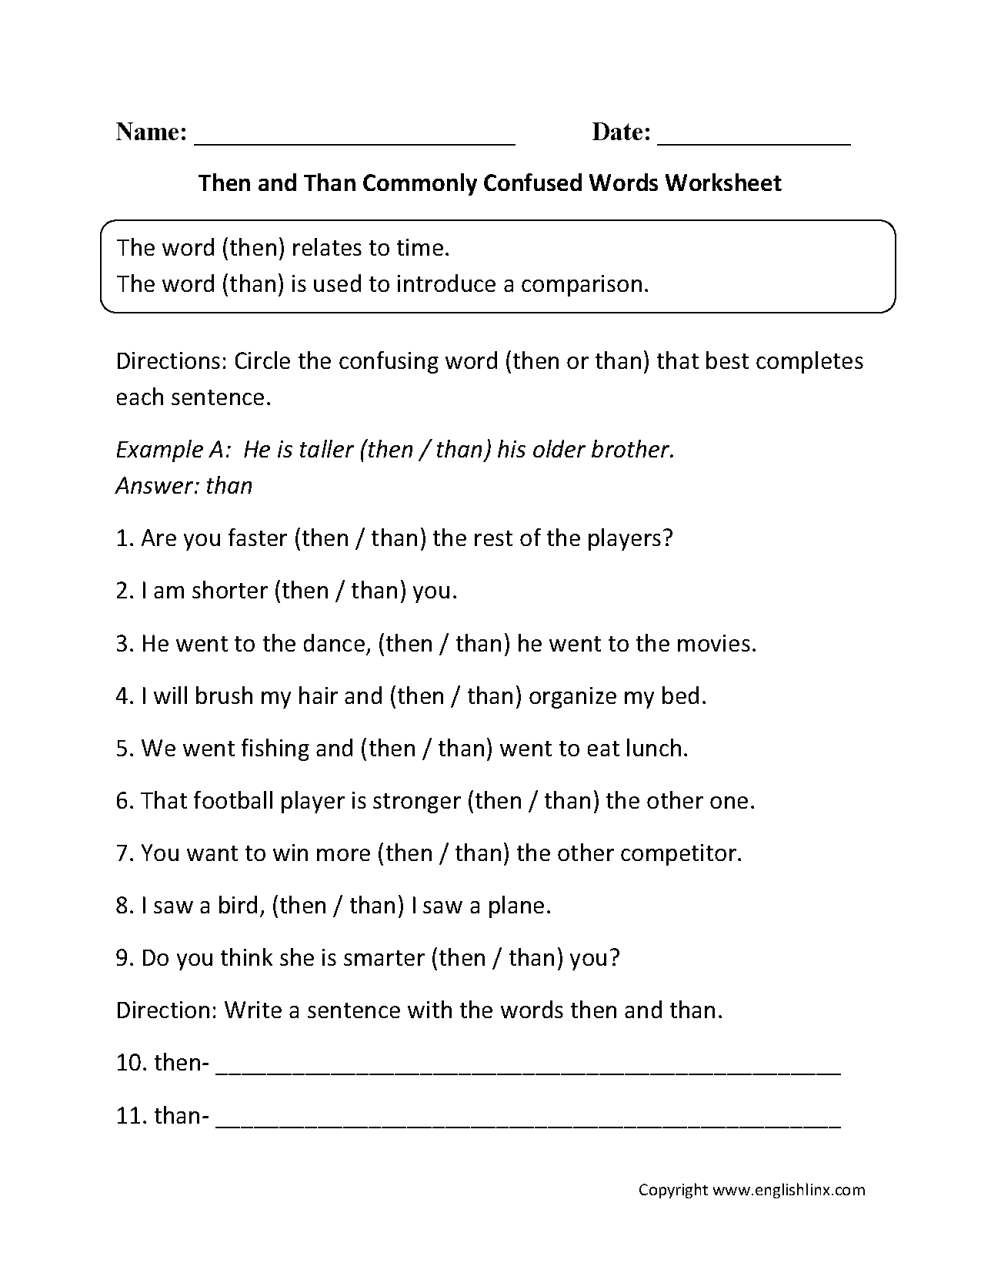 Commonly Confused Words Worksheet Pdf With Answers